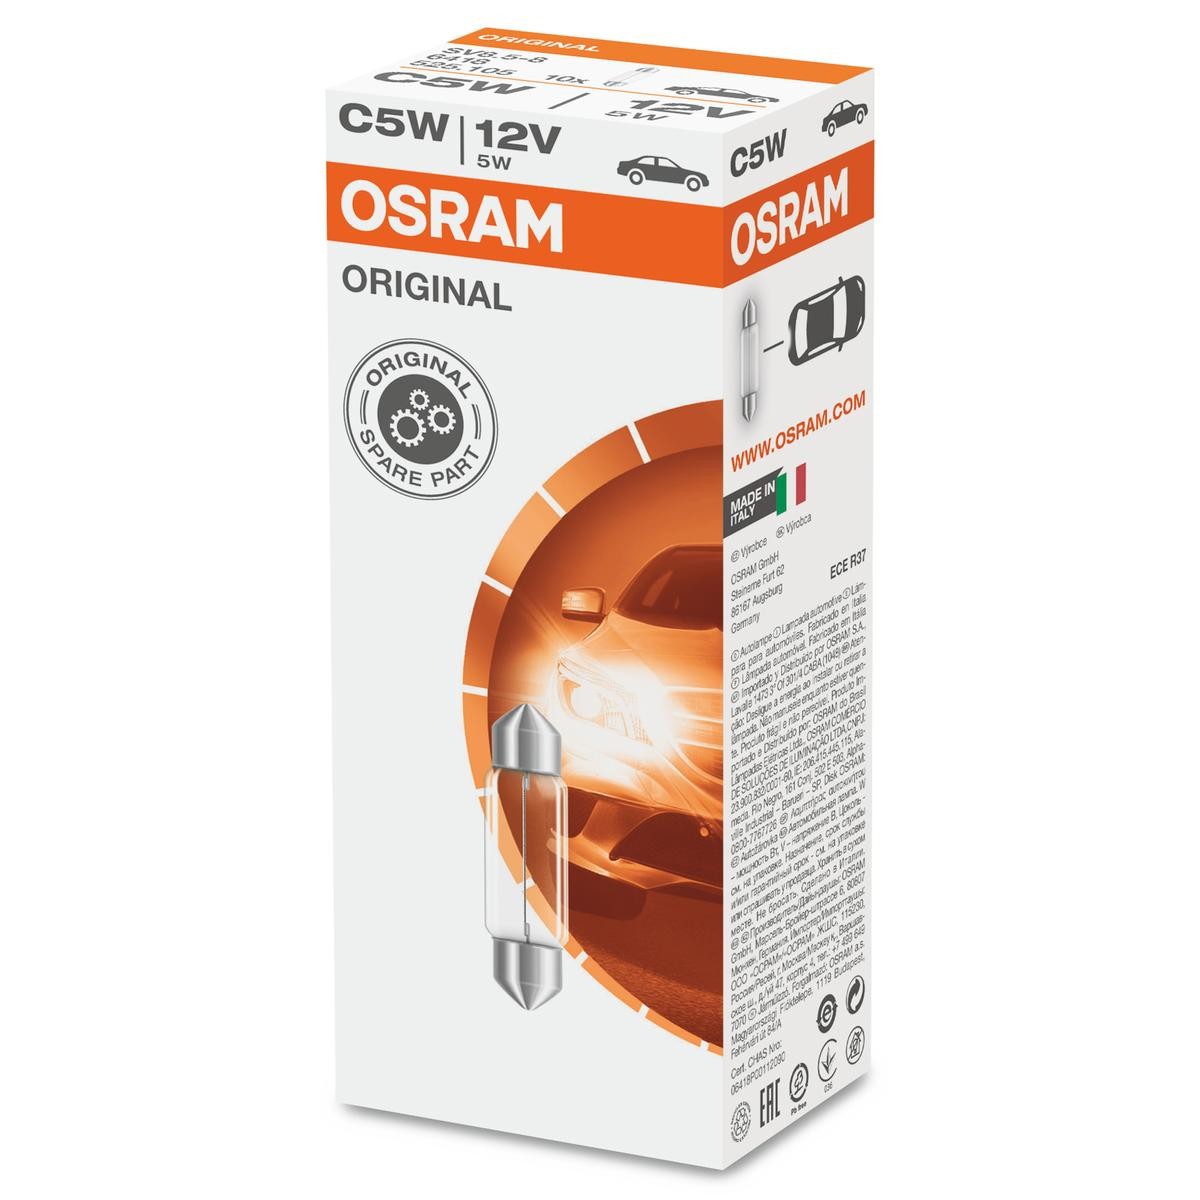 Original 6418 OSRAM Number plate light experience and price